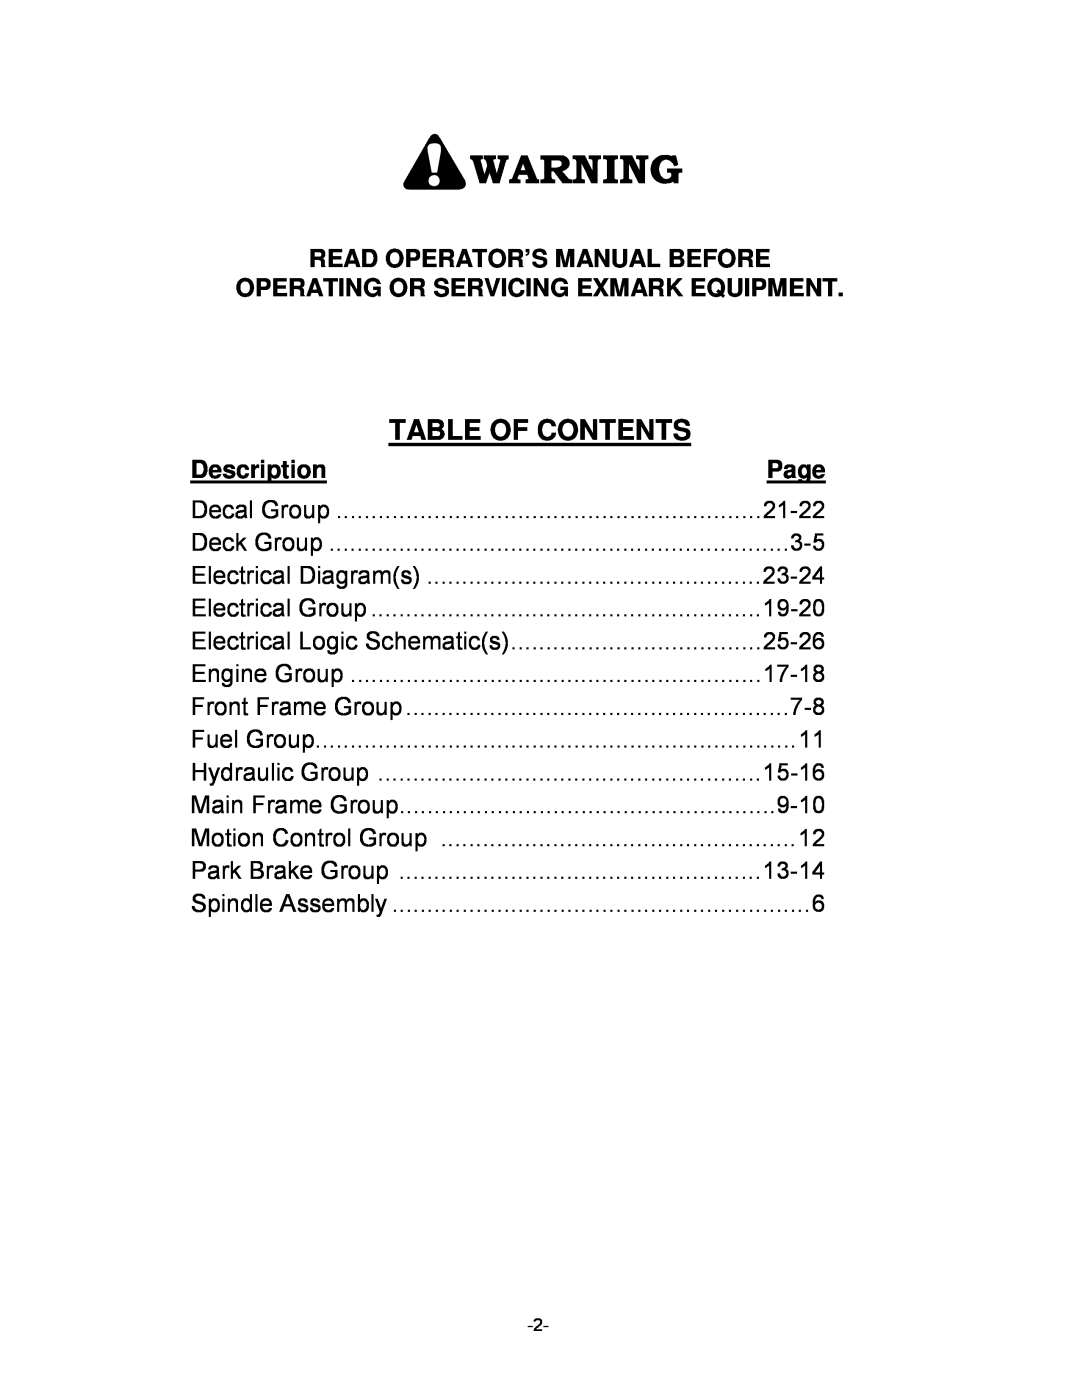 Exmark 465 Table Of Contents, Read Operator’S Manual Before, Operating Or Servicing Exmark Equipment, Description, Page 